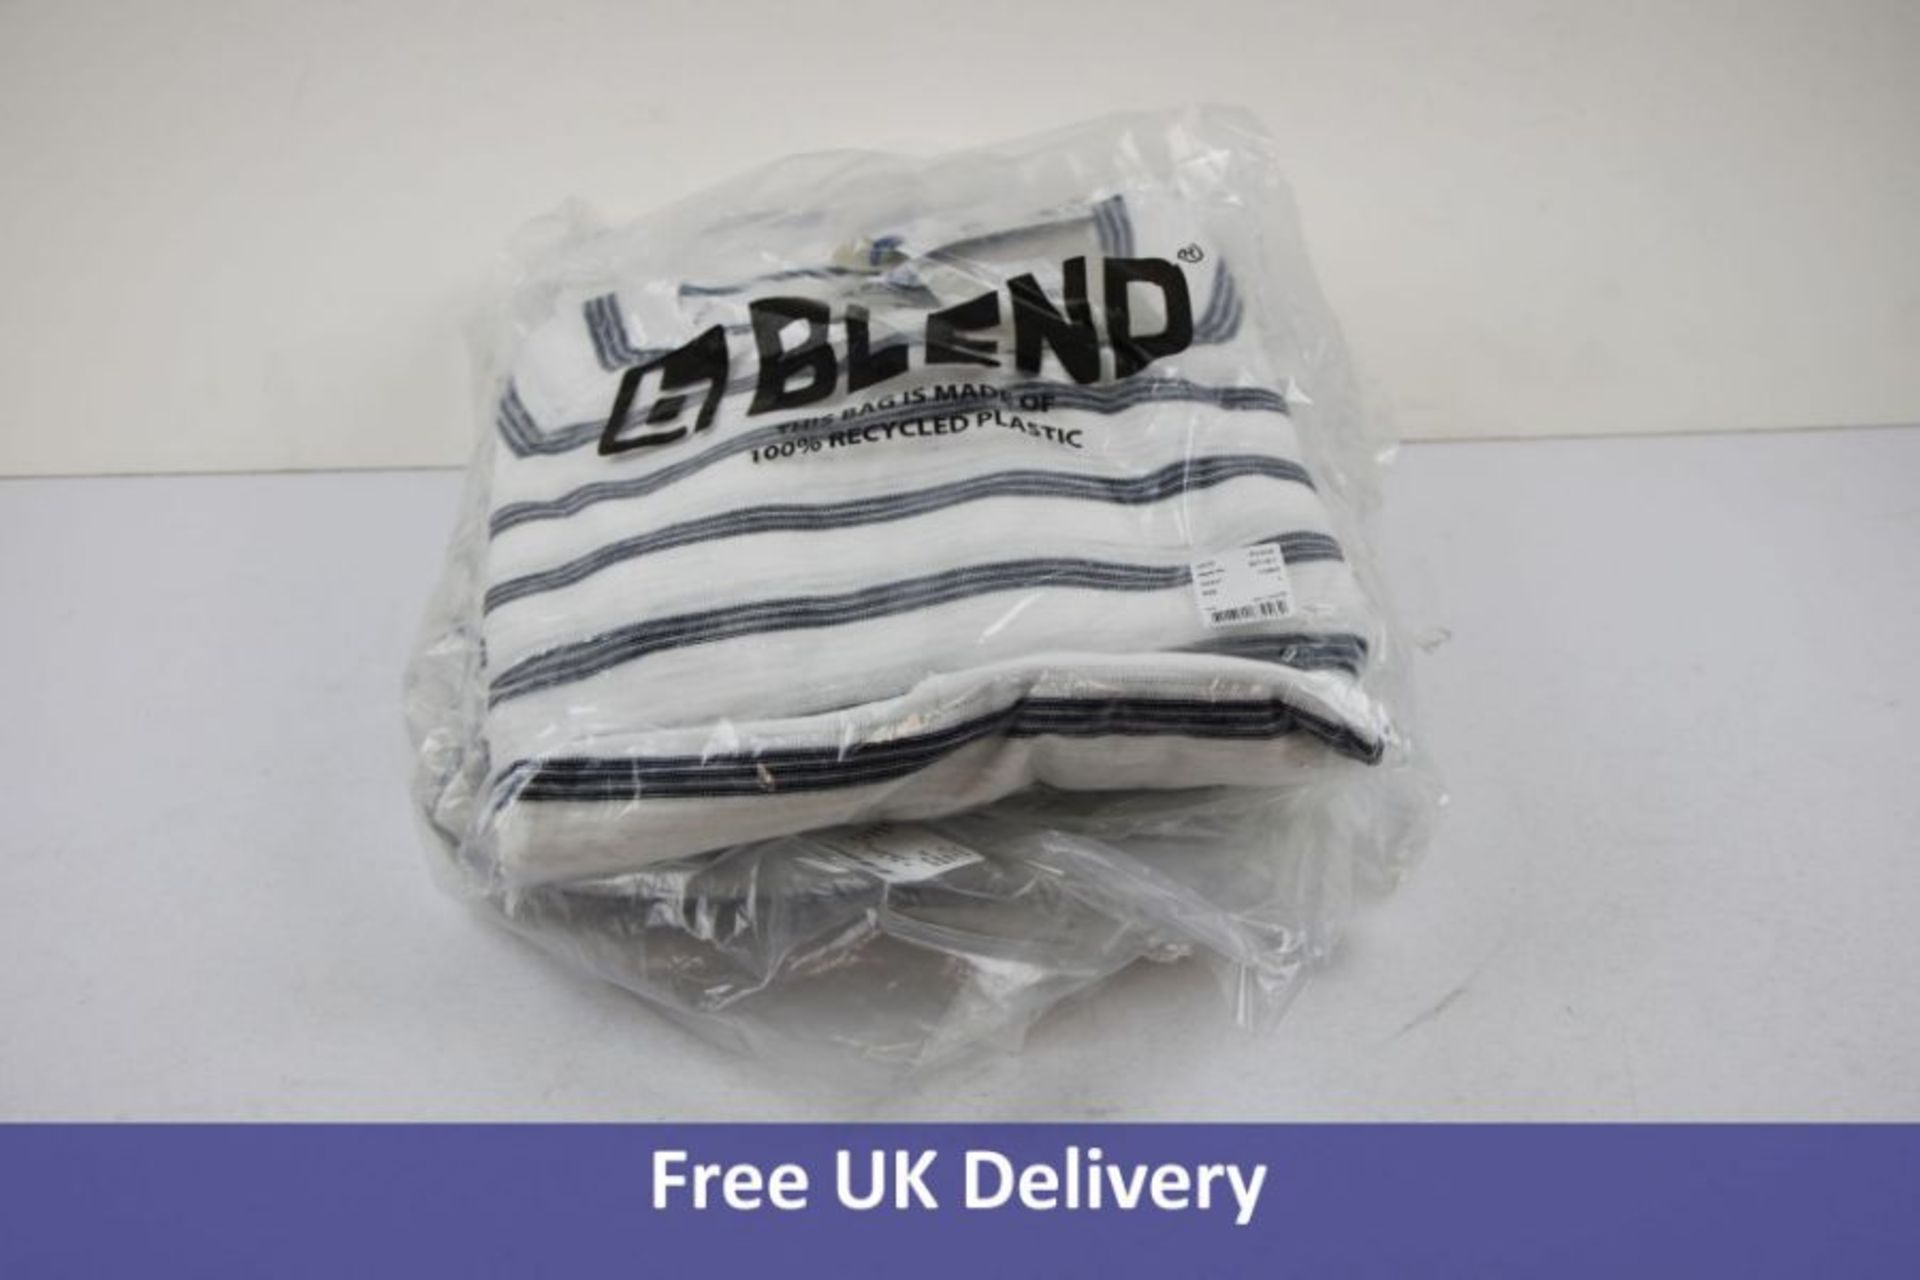 Six Blend Men's Striped Pullovers to Include 1x S, 1x M, 2x L, 1x XL and 1x XXL, White and Blue